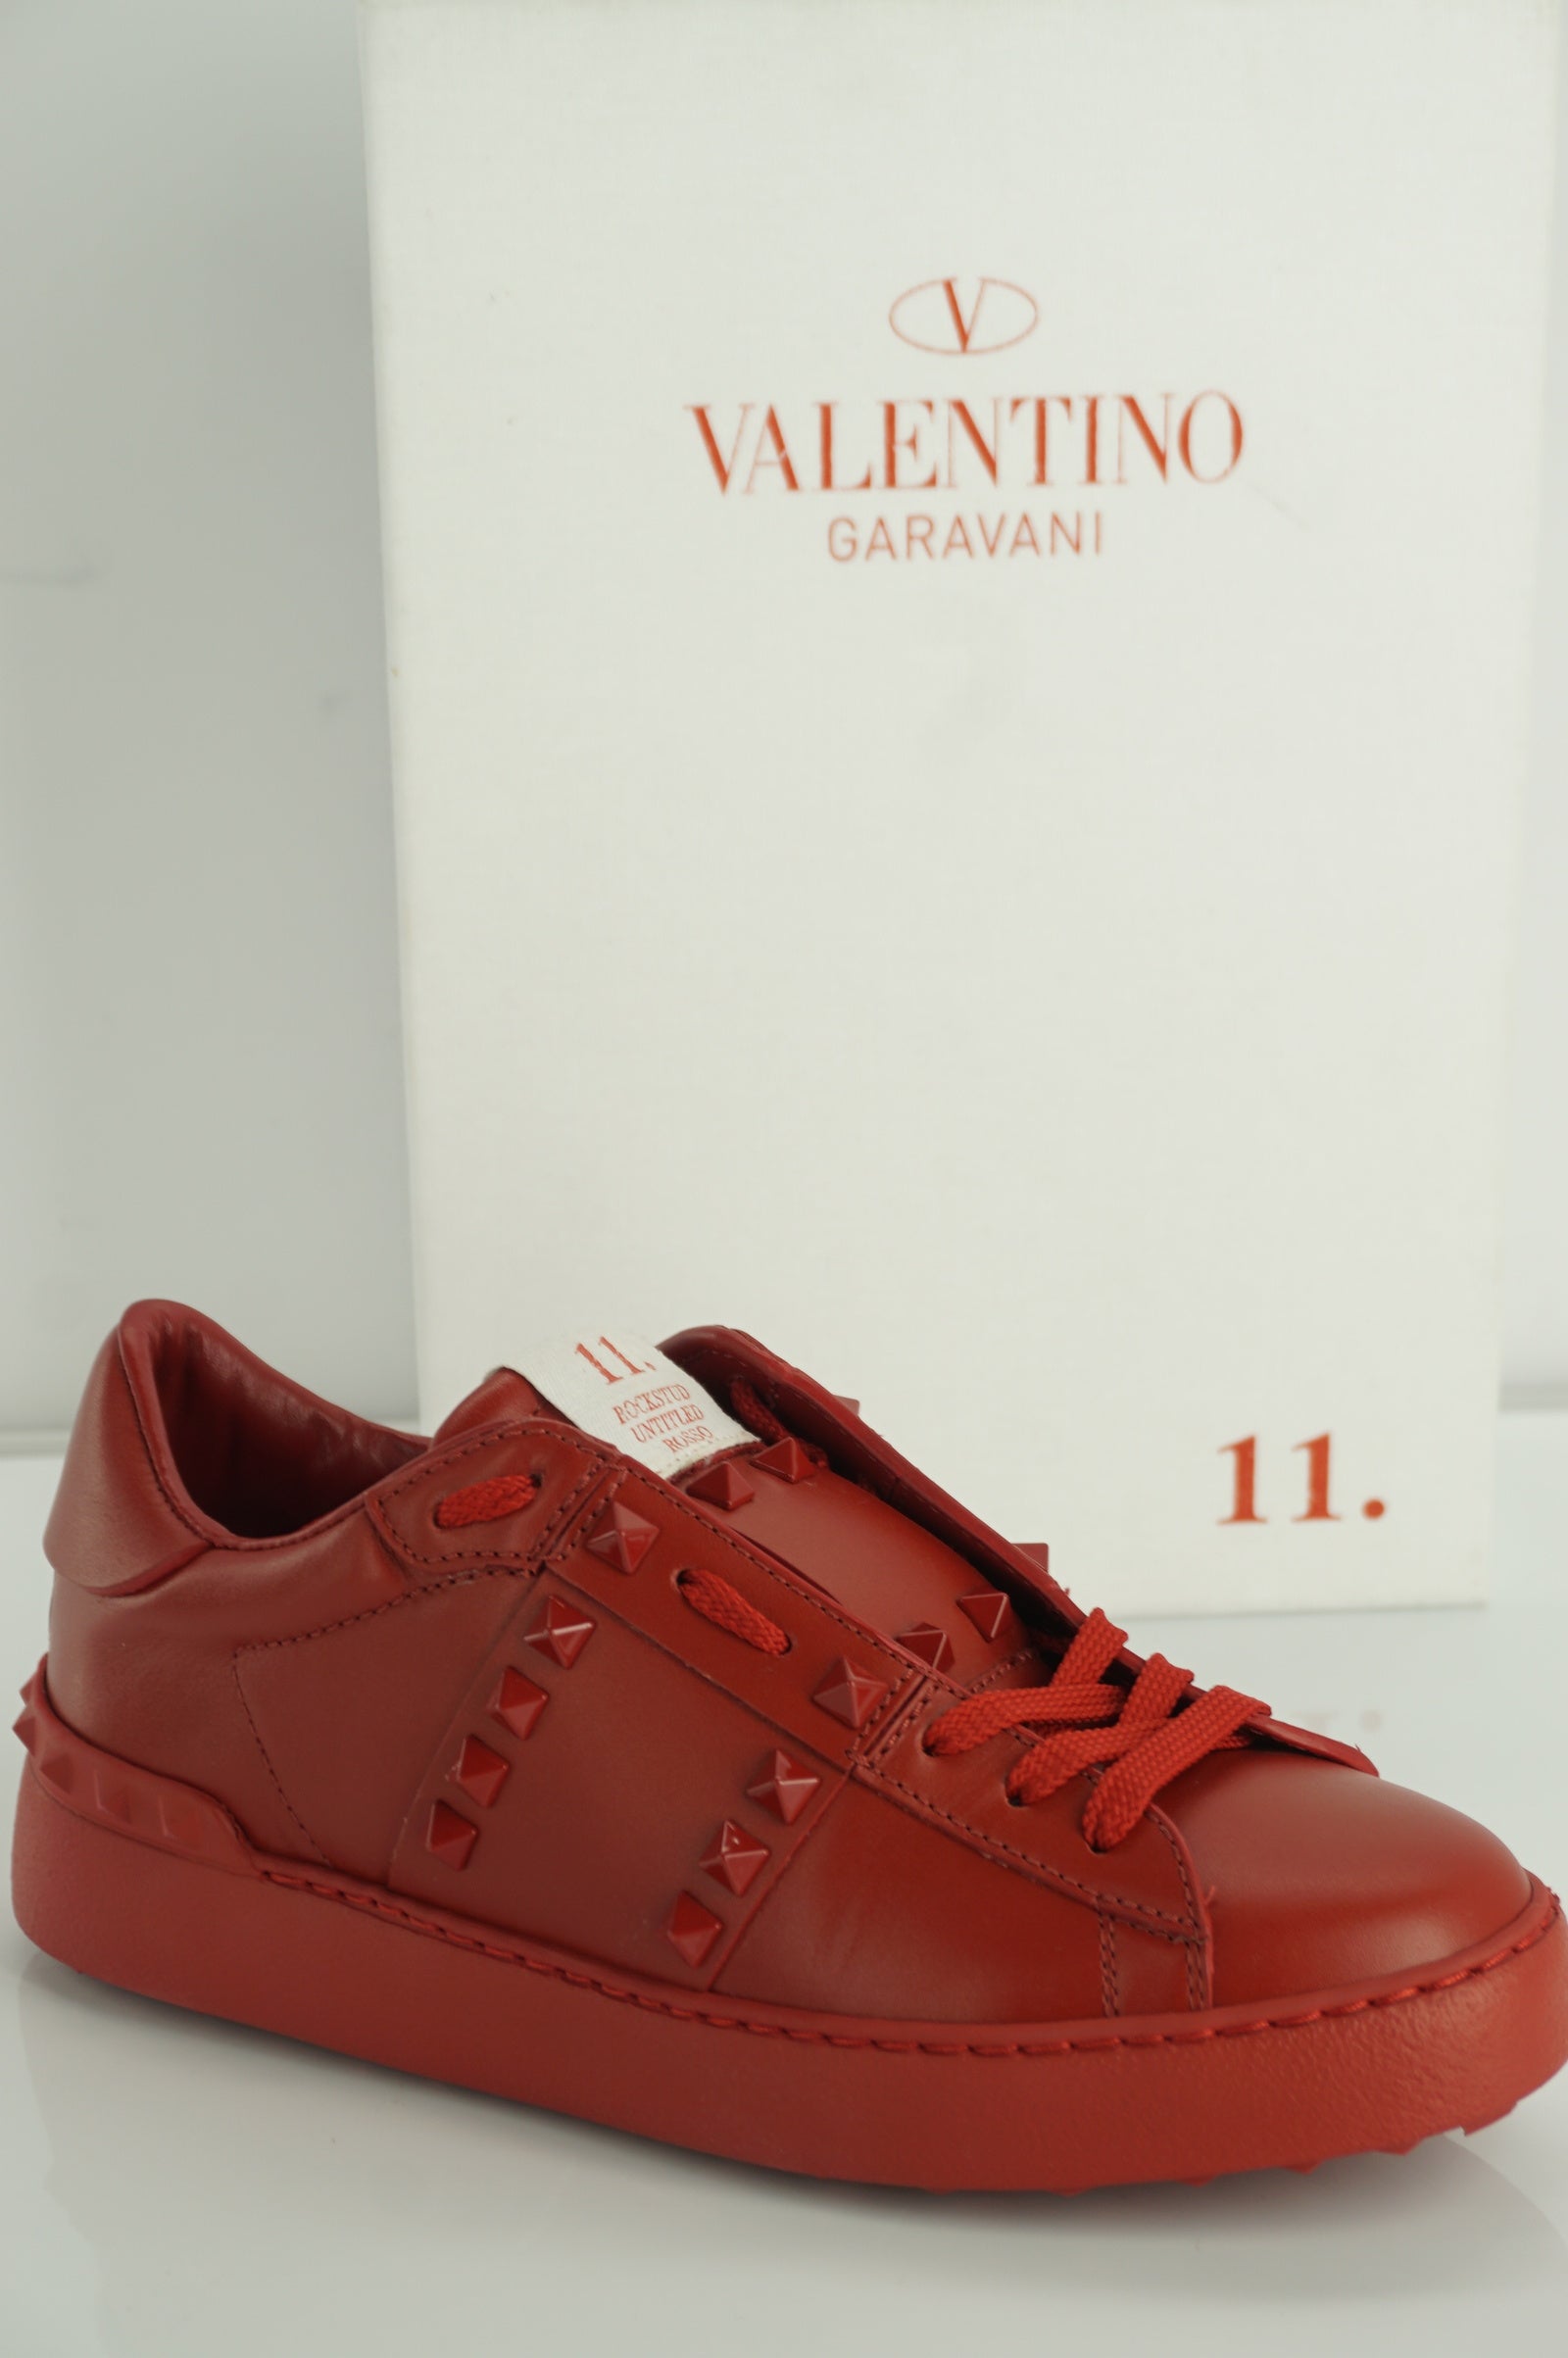 Valentino Rockstud Red Leather Sneaker Flats Size 36 low top lace up NIB $795